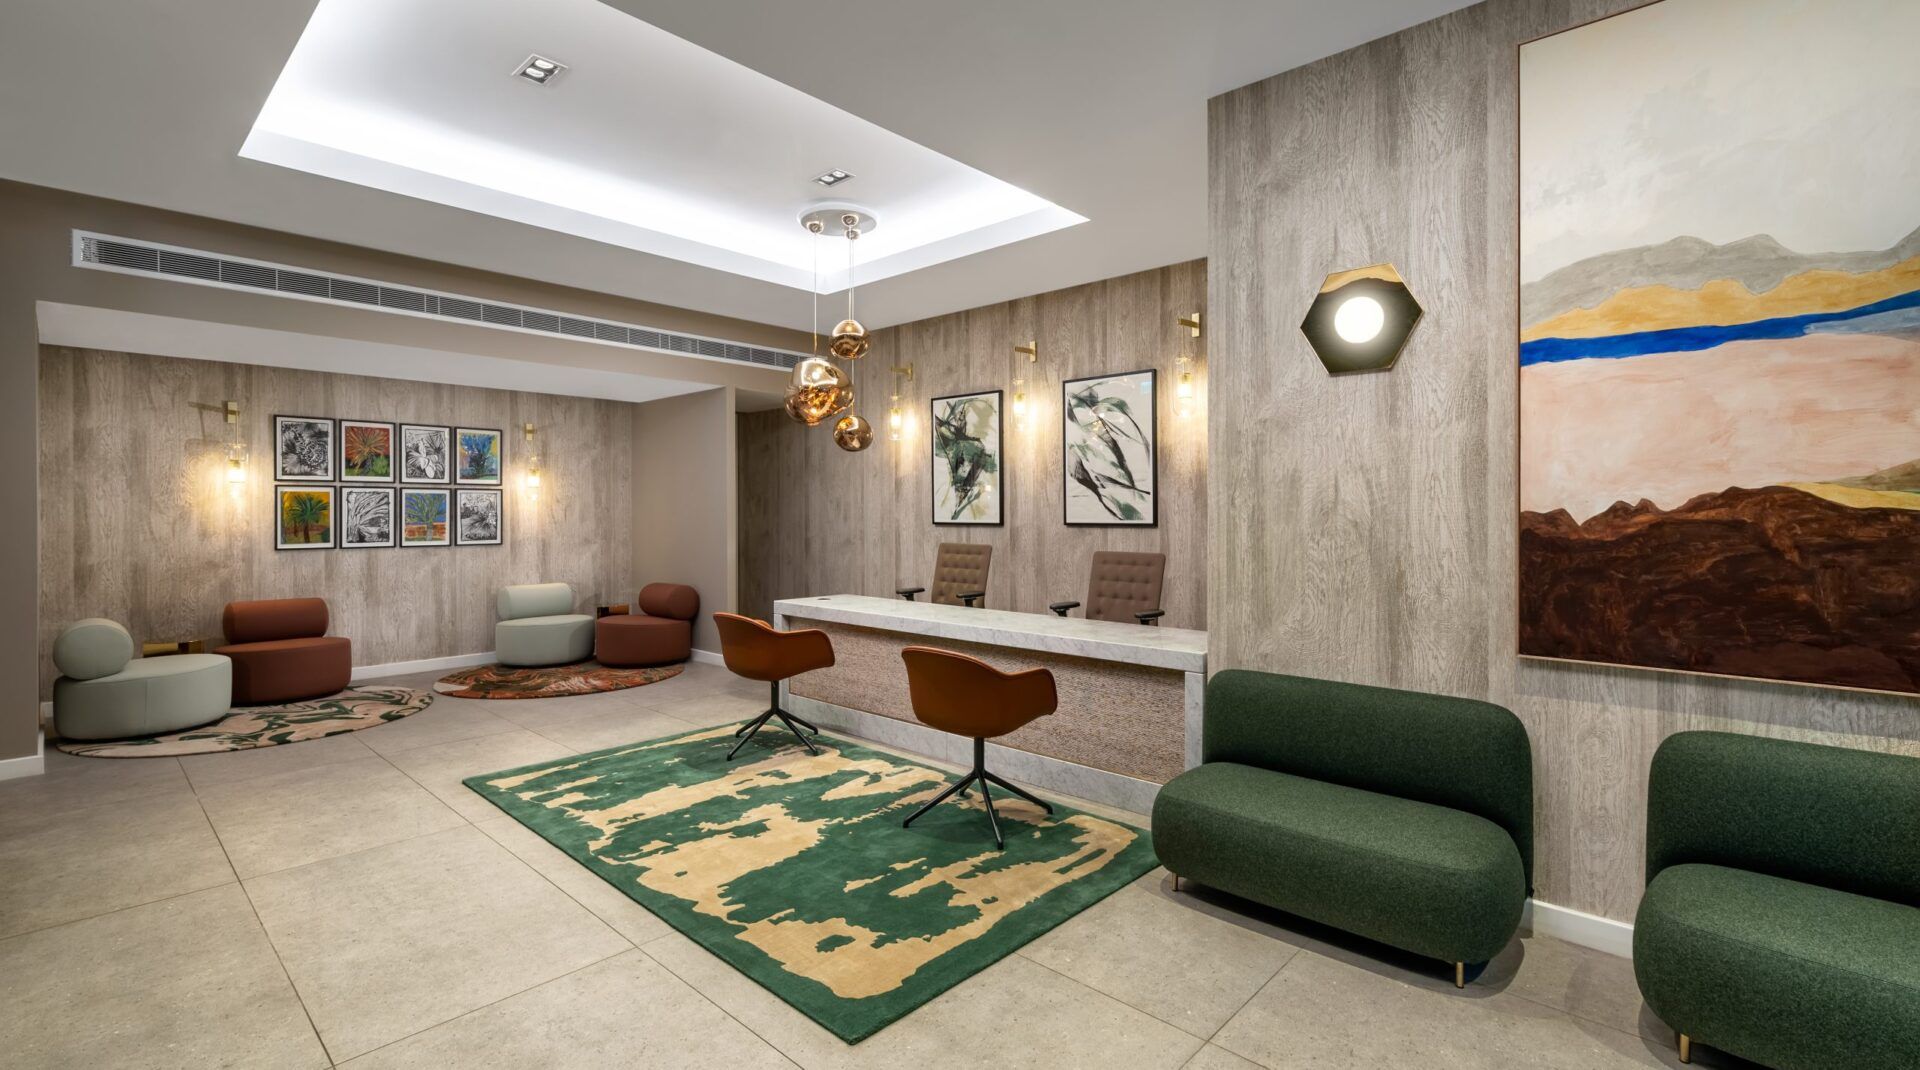 https://thelincolnsuites.com/wp-content/uploads/2021/08/1.-The-Lincoln-Suites-Lobby-scaled-1920x1070.jpg